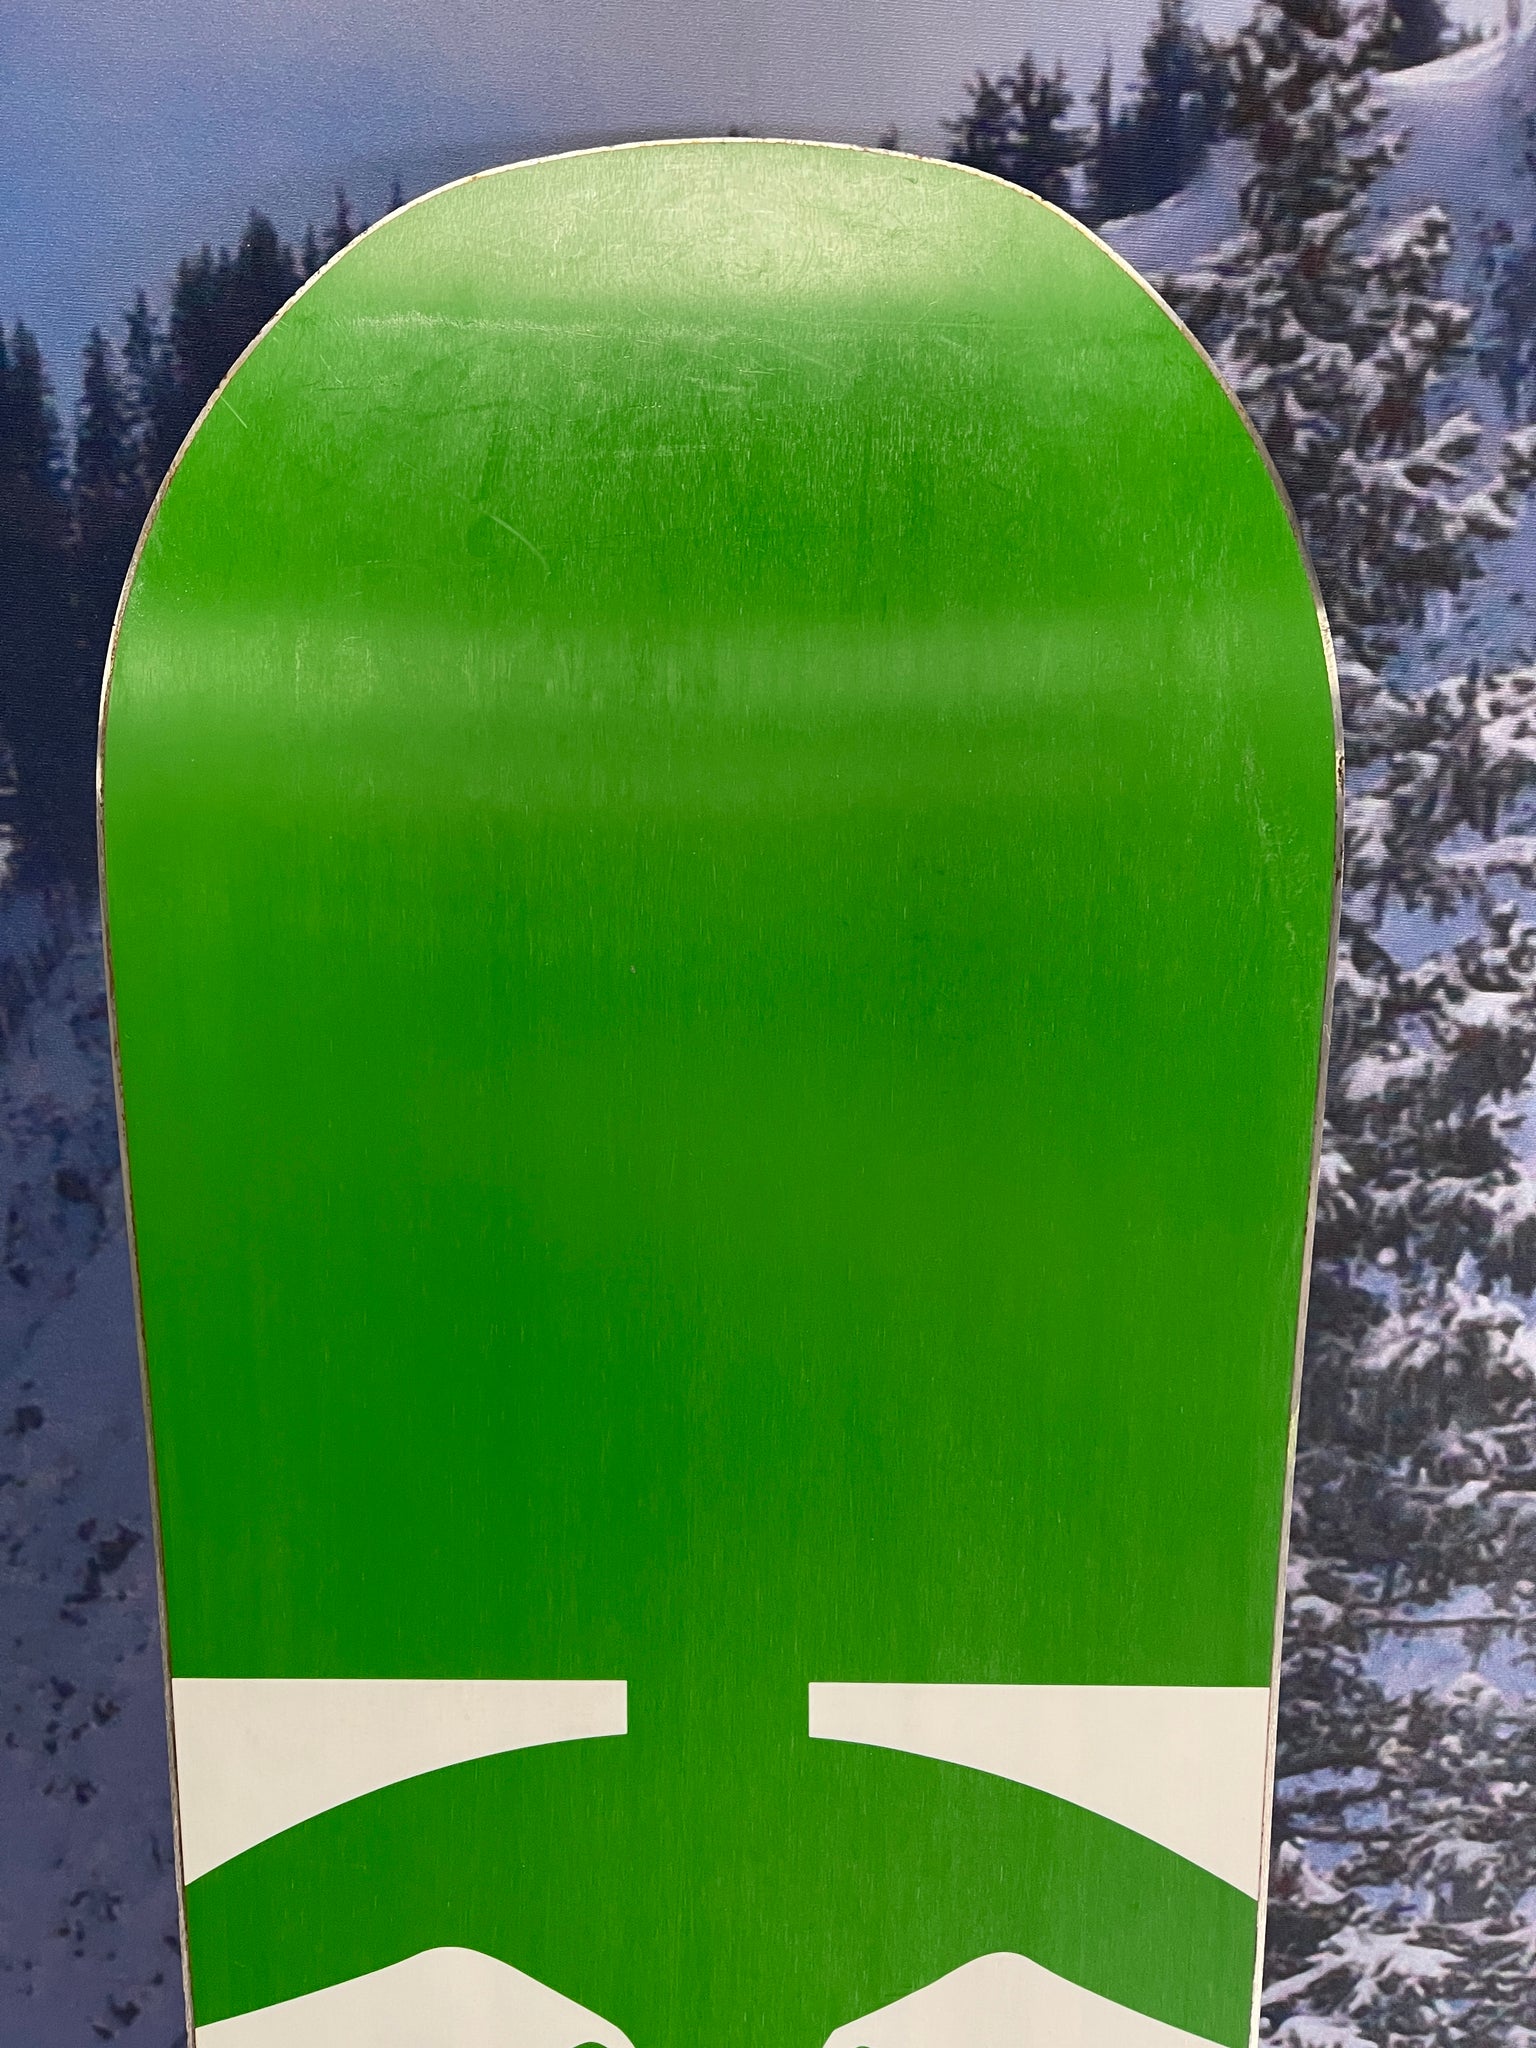 USED Never Summer Snow Trooper 159cm - 2020 All-Mountain Snowboard